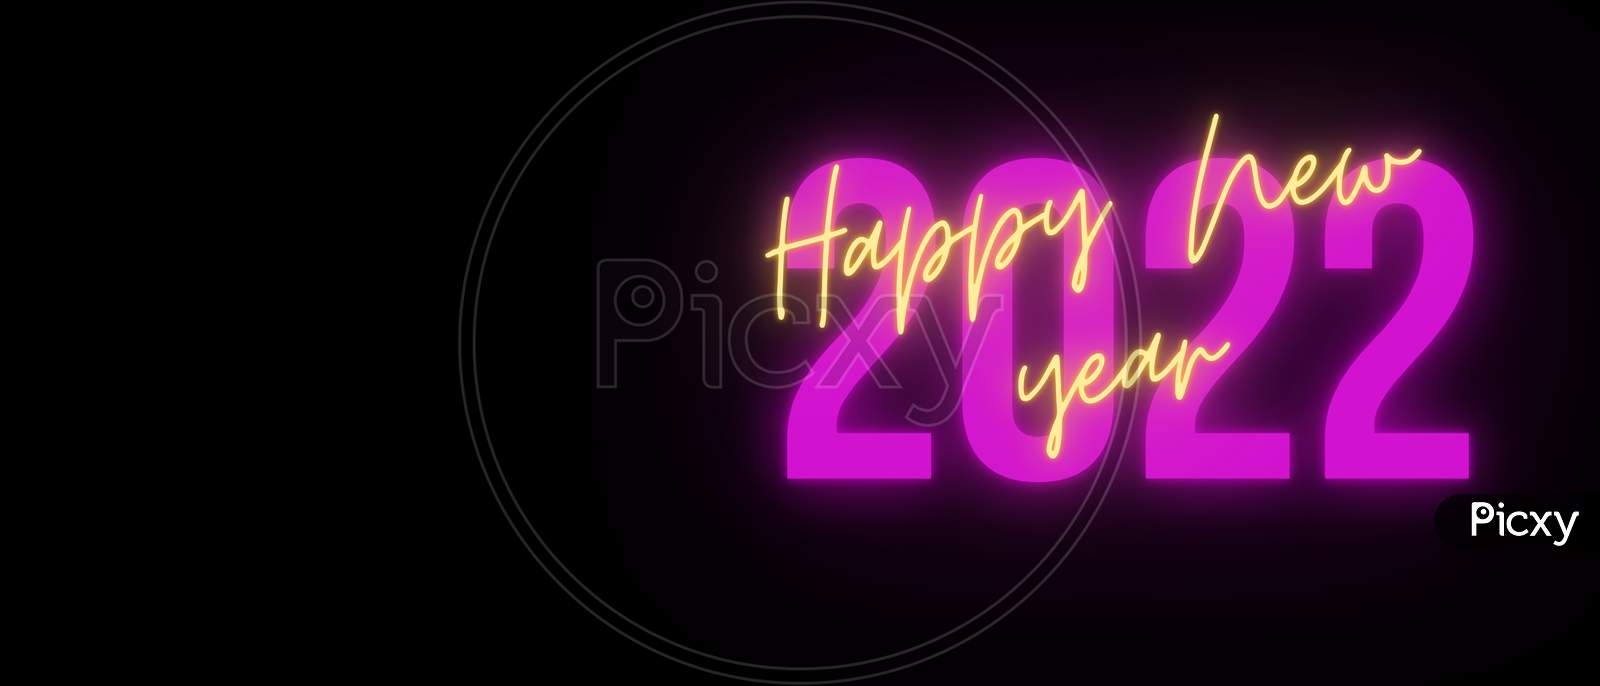 New year template of 2022 in neon colours. Space for text and editing.